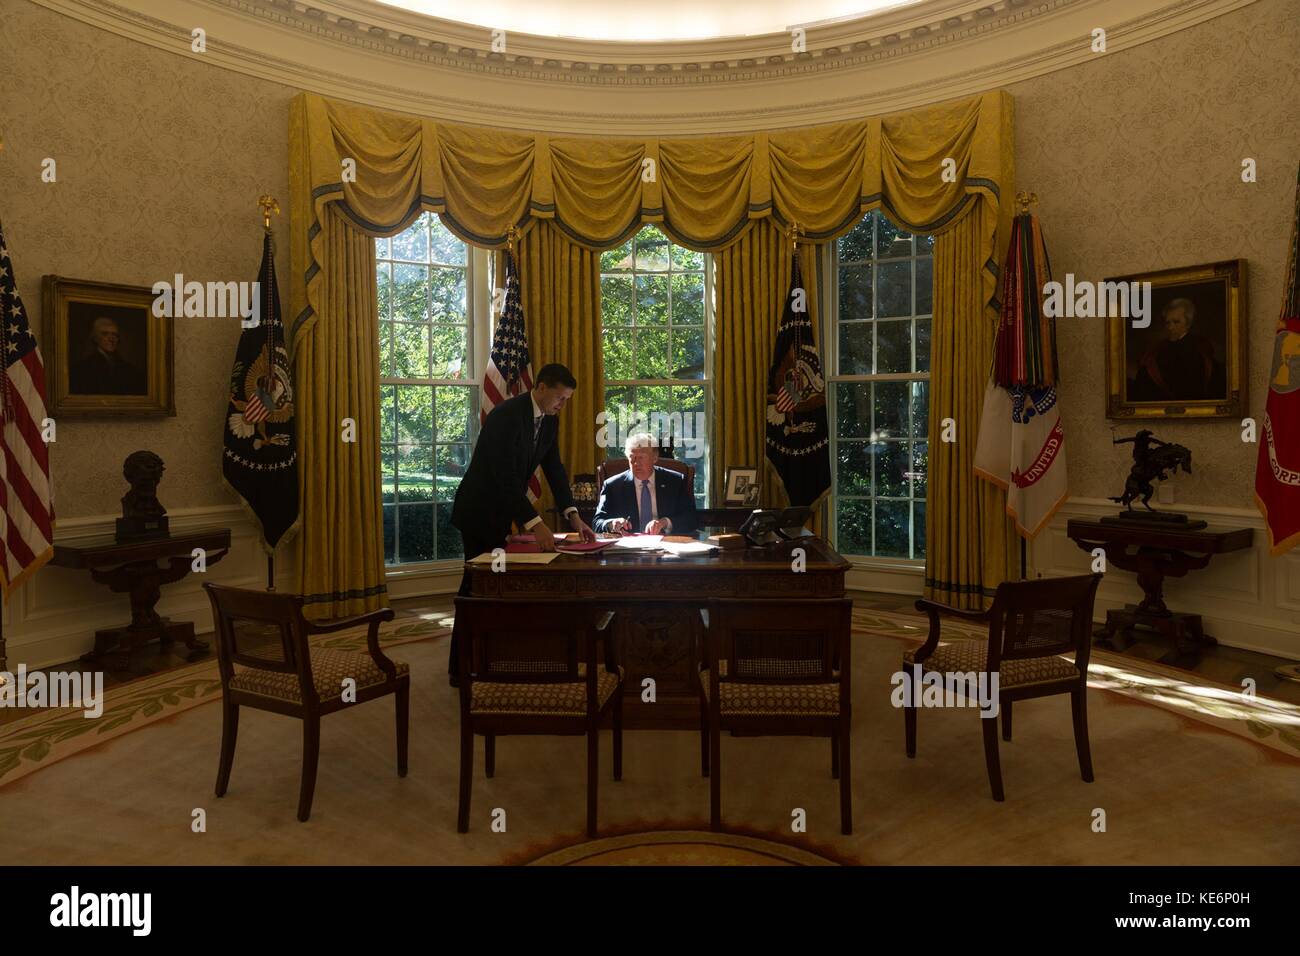 U.S. President Donald Trump signs documents in the Oval Office of the White House October 16, 2017 in Washington, D.C. Stock Photo